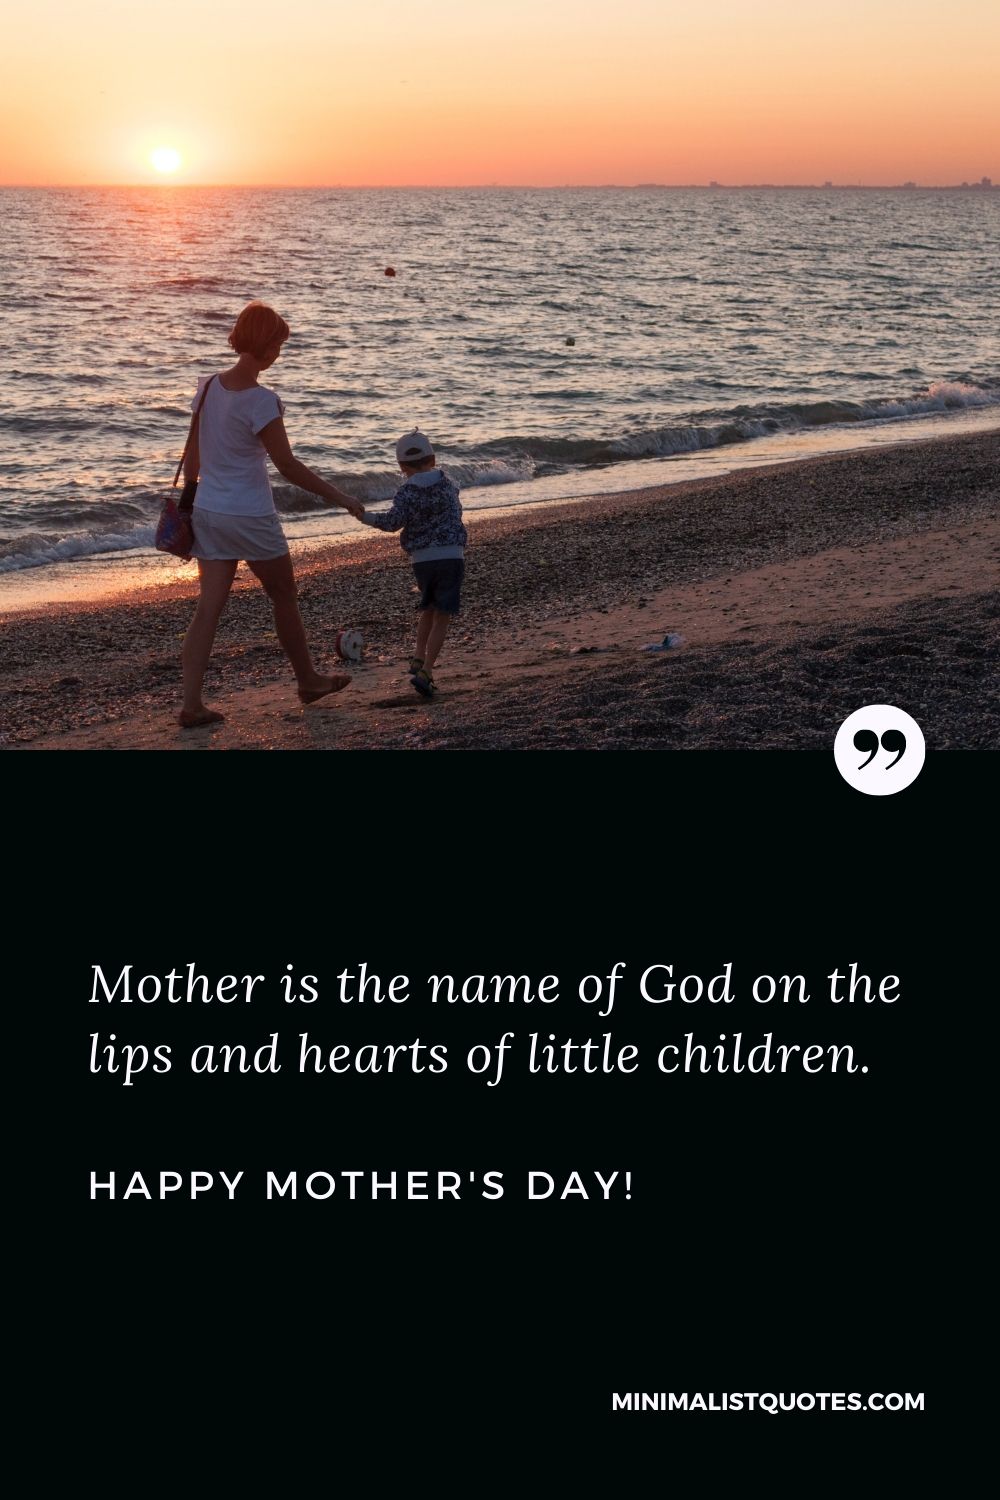 Mothers day messages in English: Mother is the name of God on the lips and hearts of little children. Happy Mothers Day!